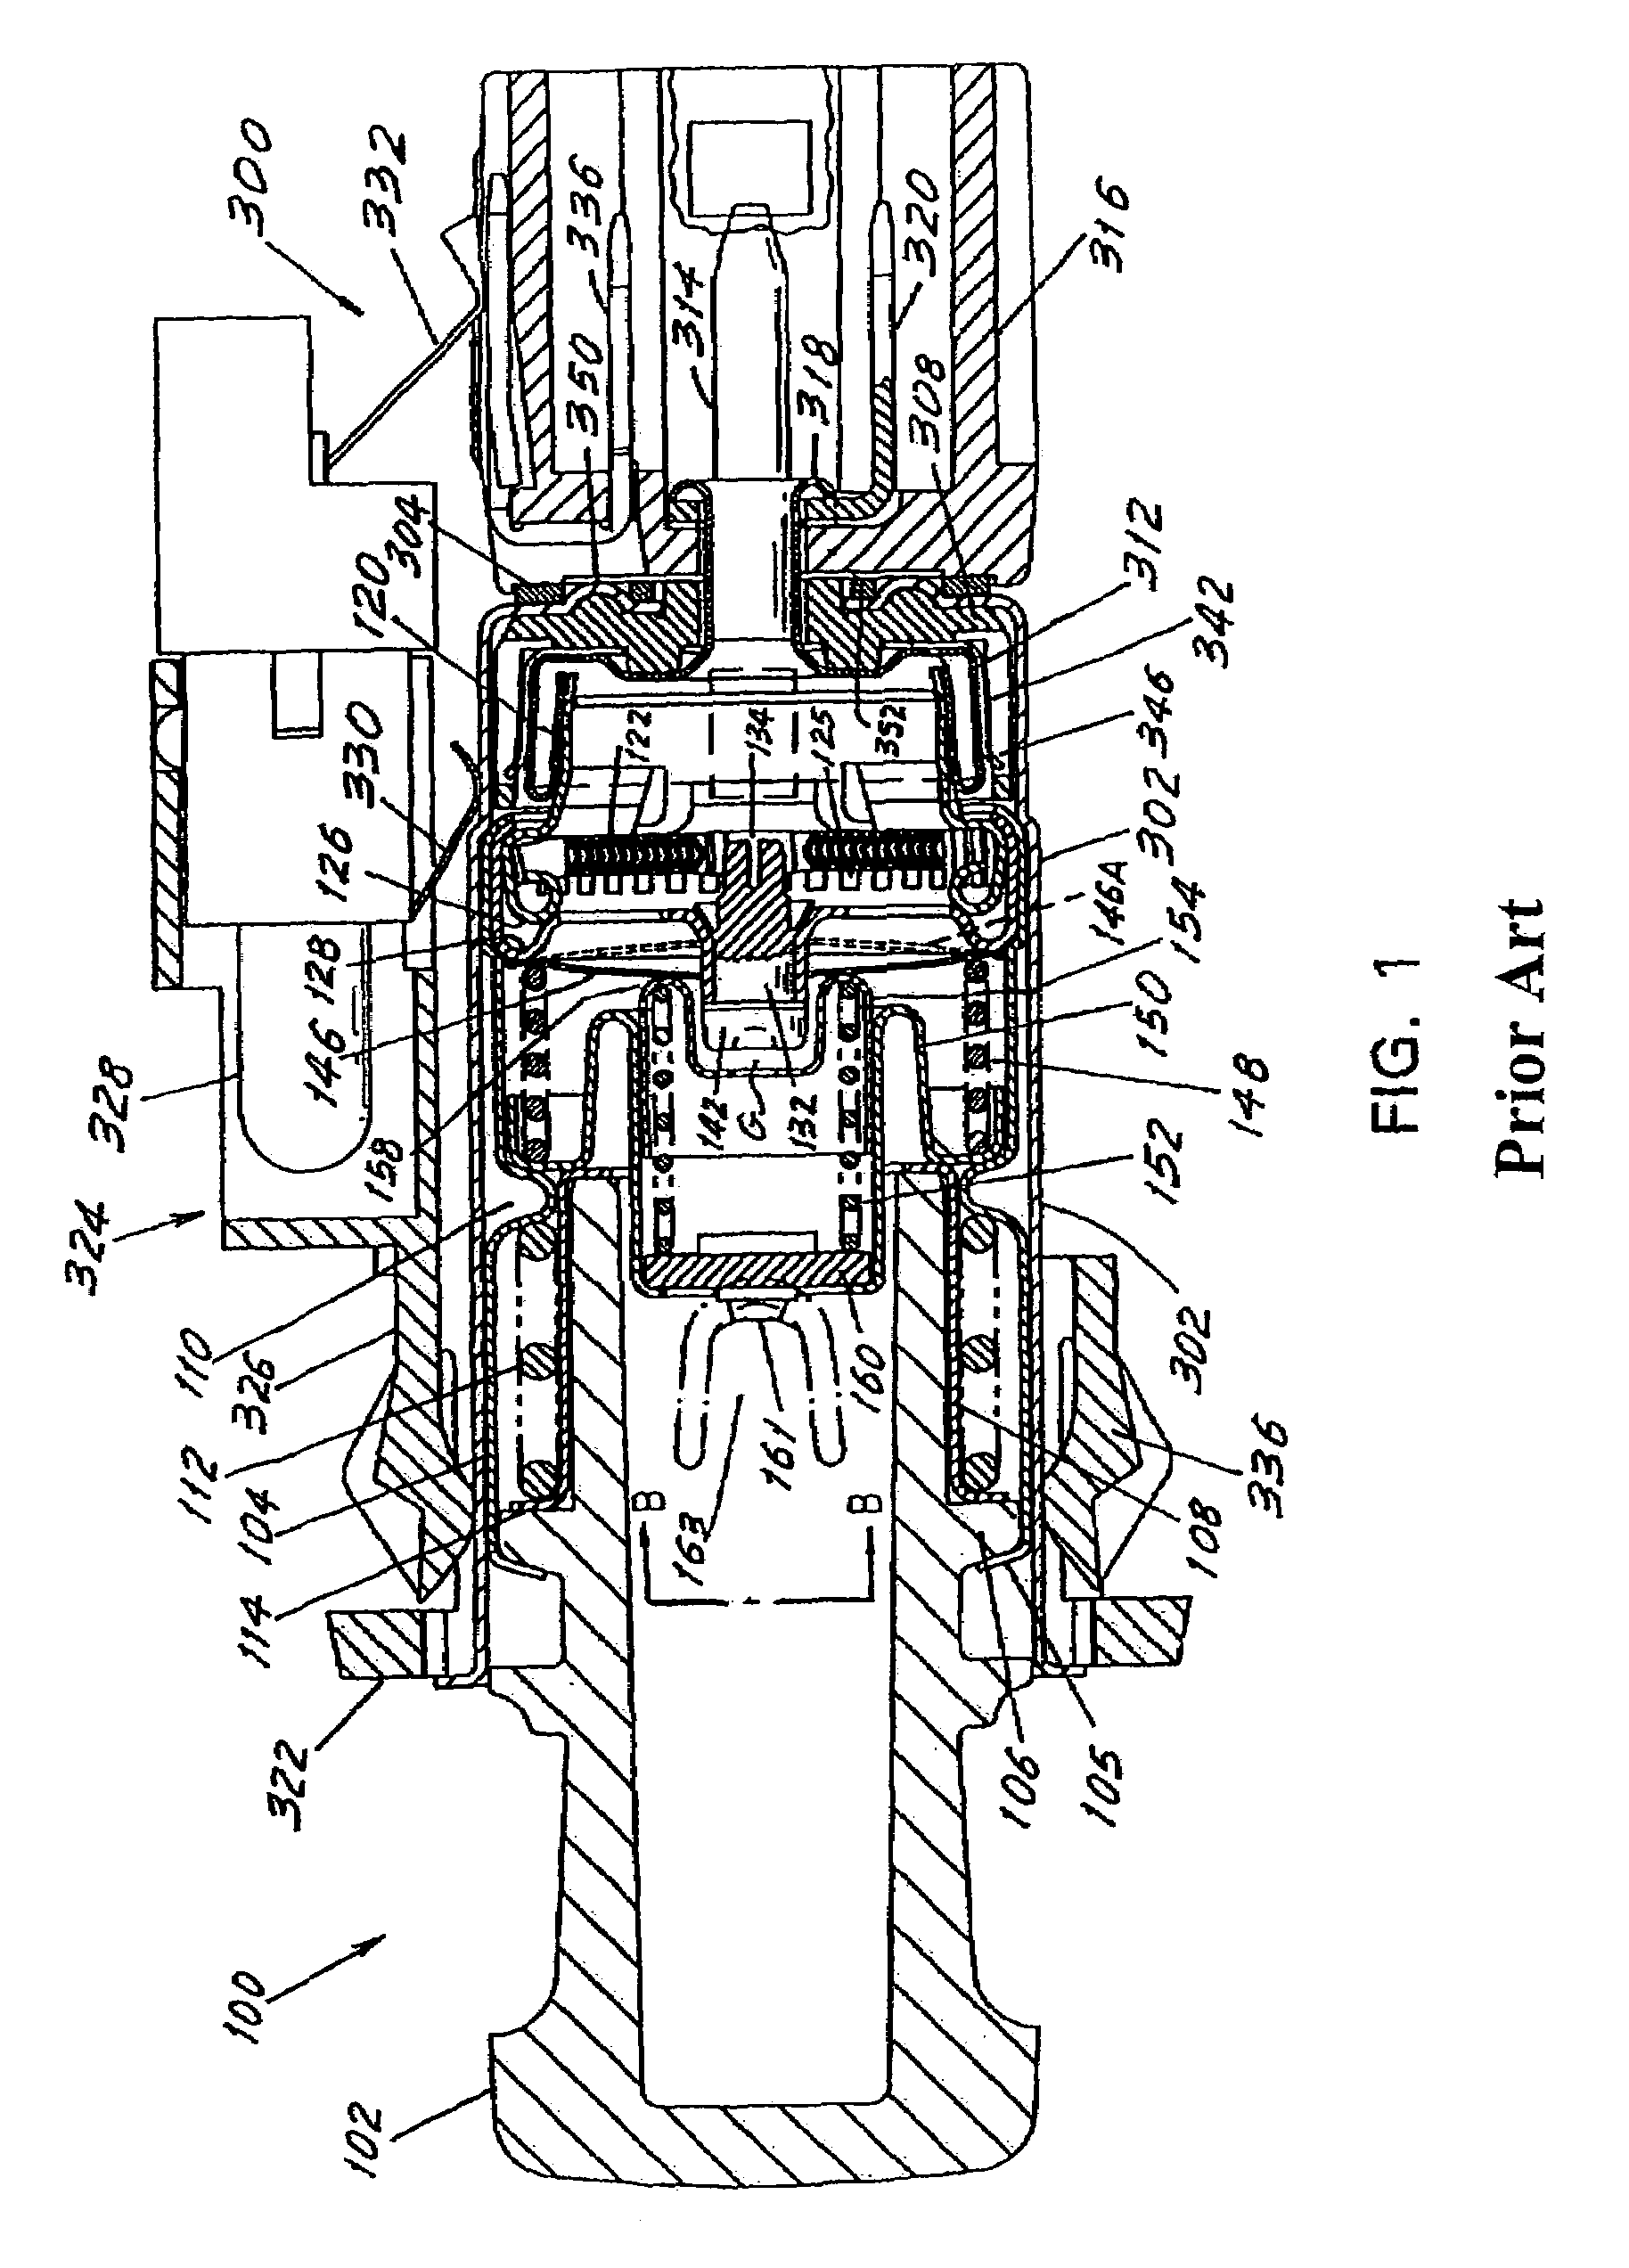 Double-disk assembly for a cigar or cigarette lighter